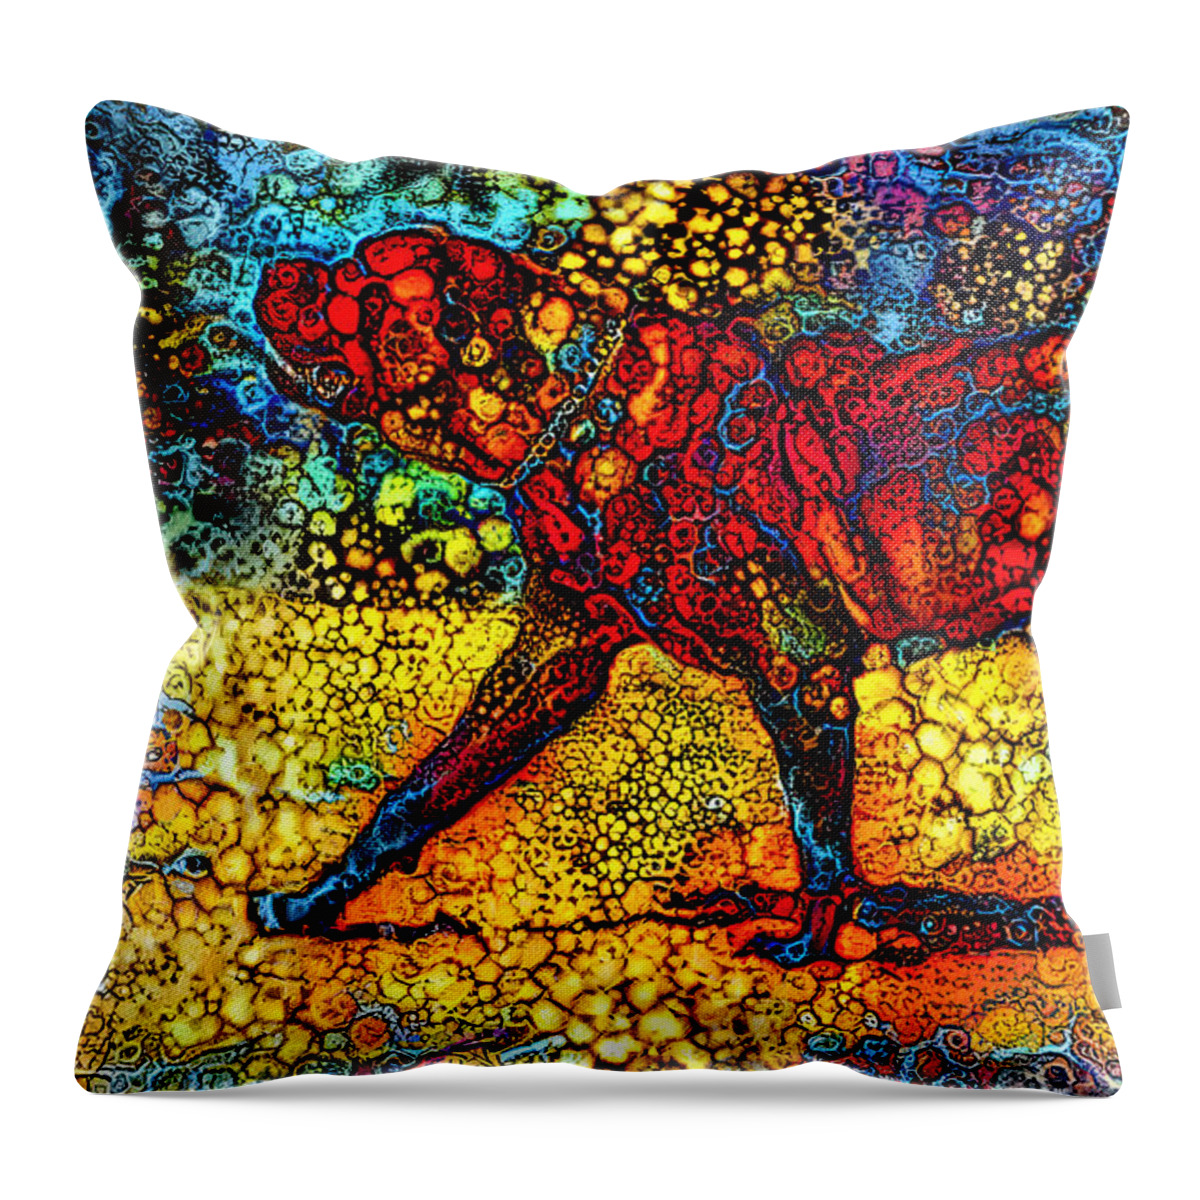 English Mastiff Throw Pillow featuring the digital art English Mastiff waiting for a treat - colorful abstract painting in blue, yellow and red by Nicko Prints